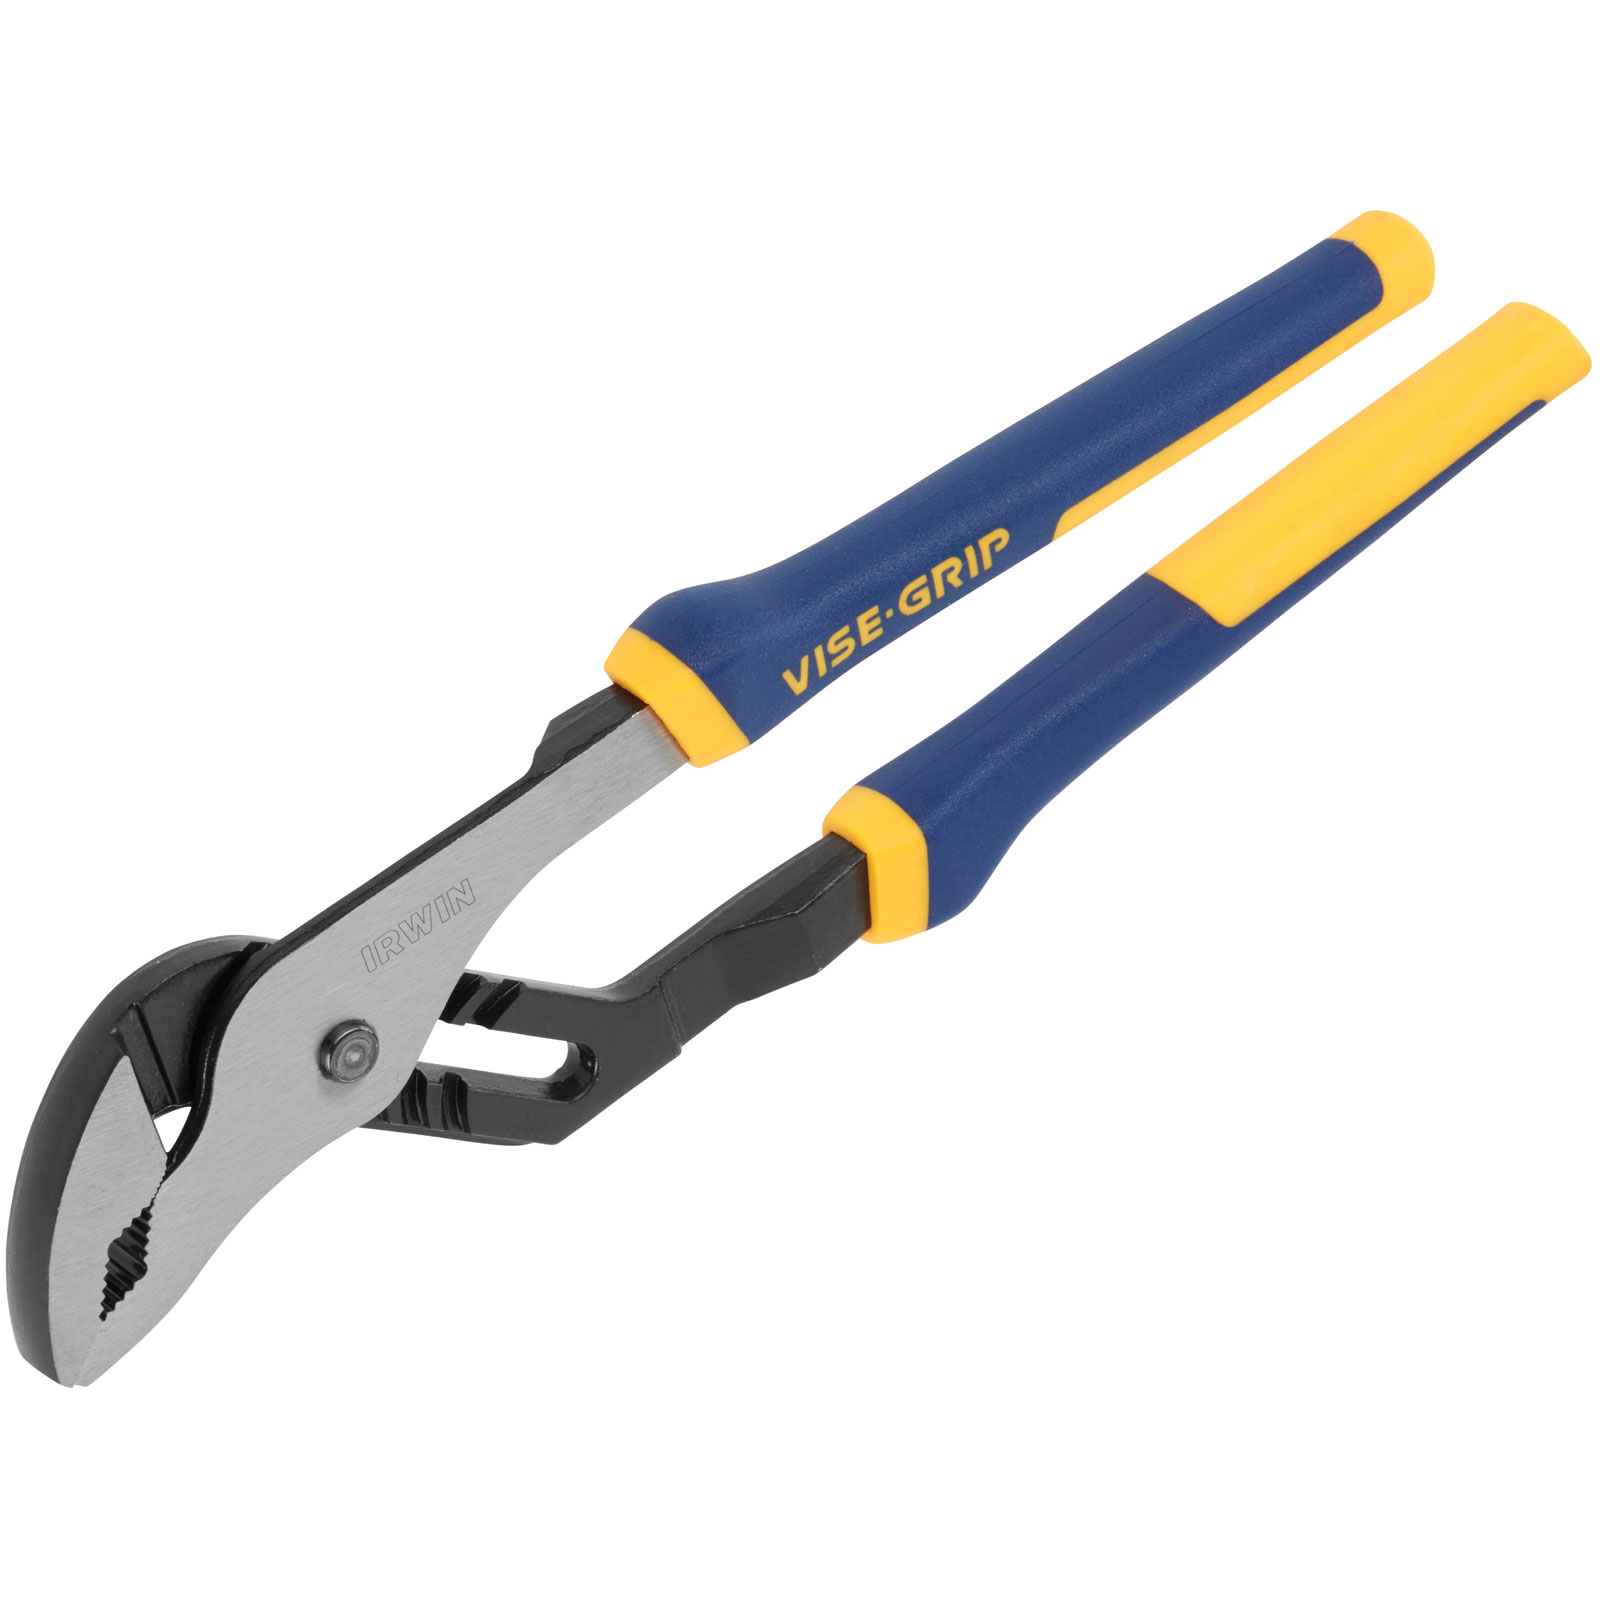 Irwin 10 Groove Joint Smooth Jaw Pliers - 2078500